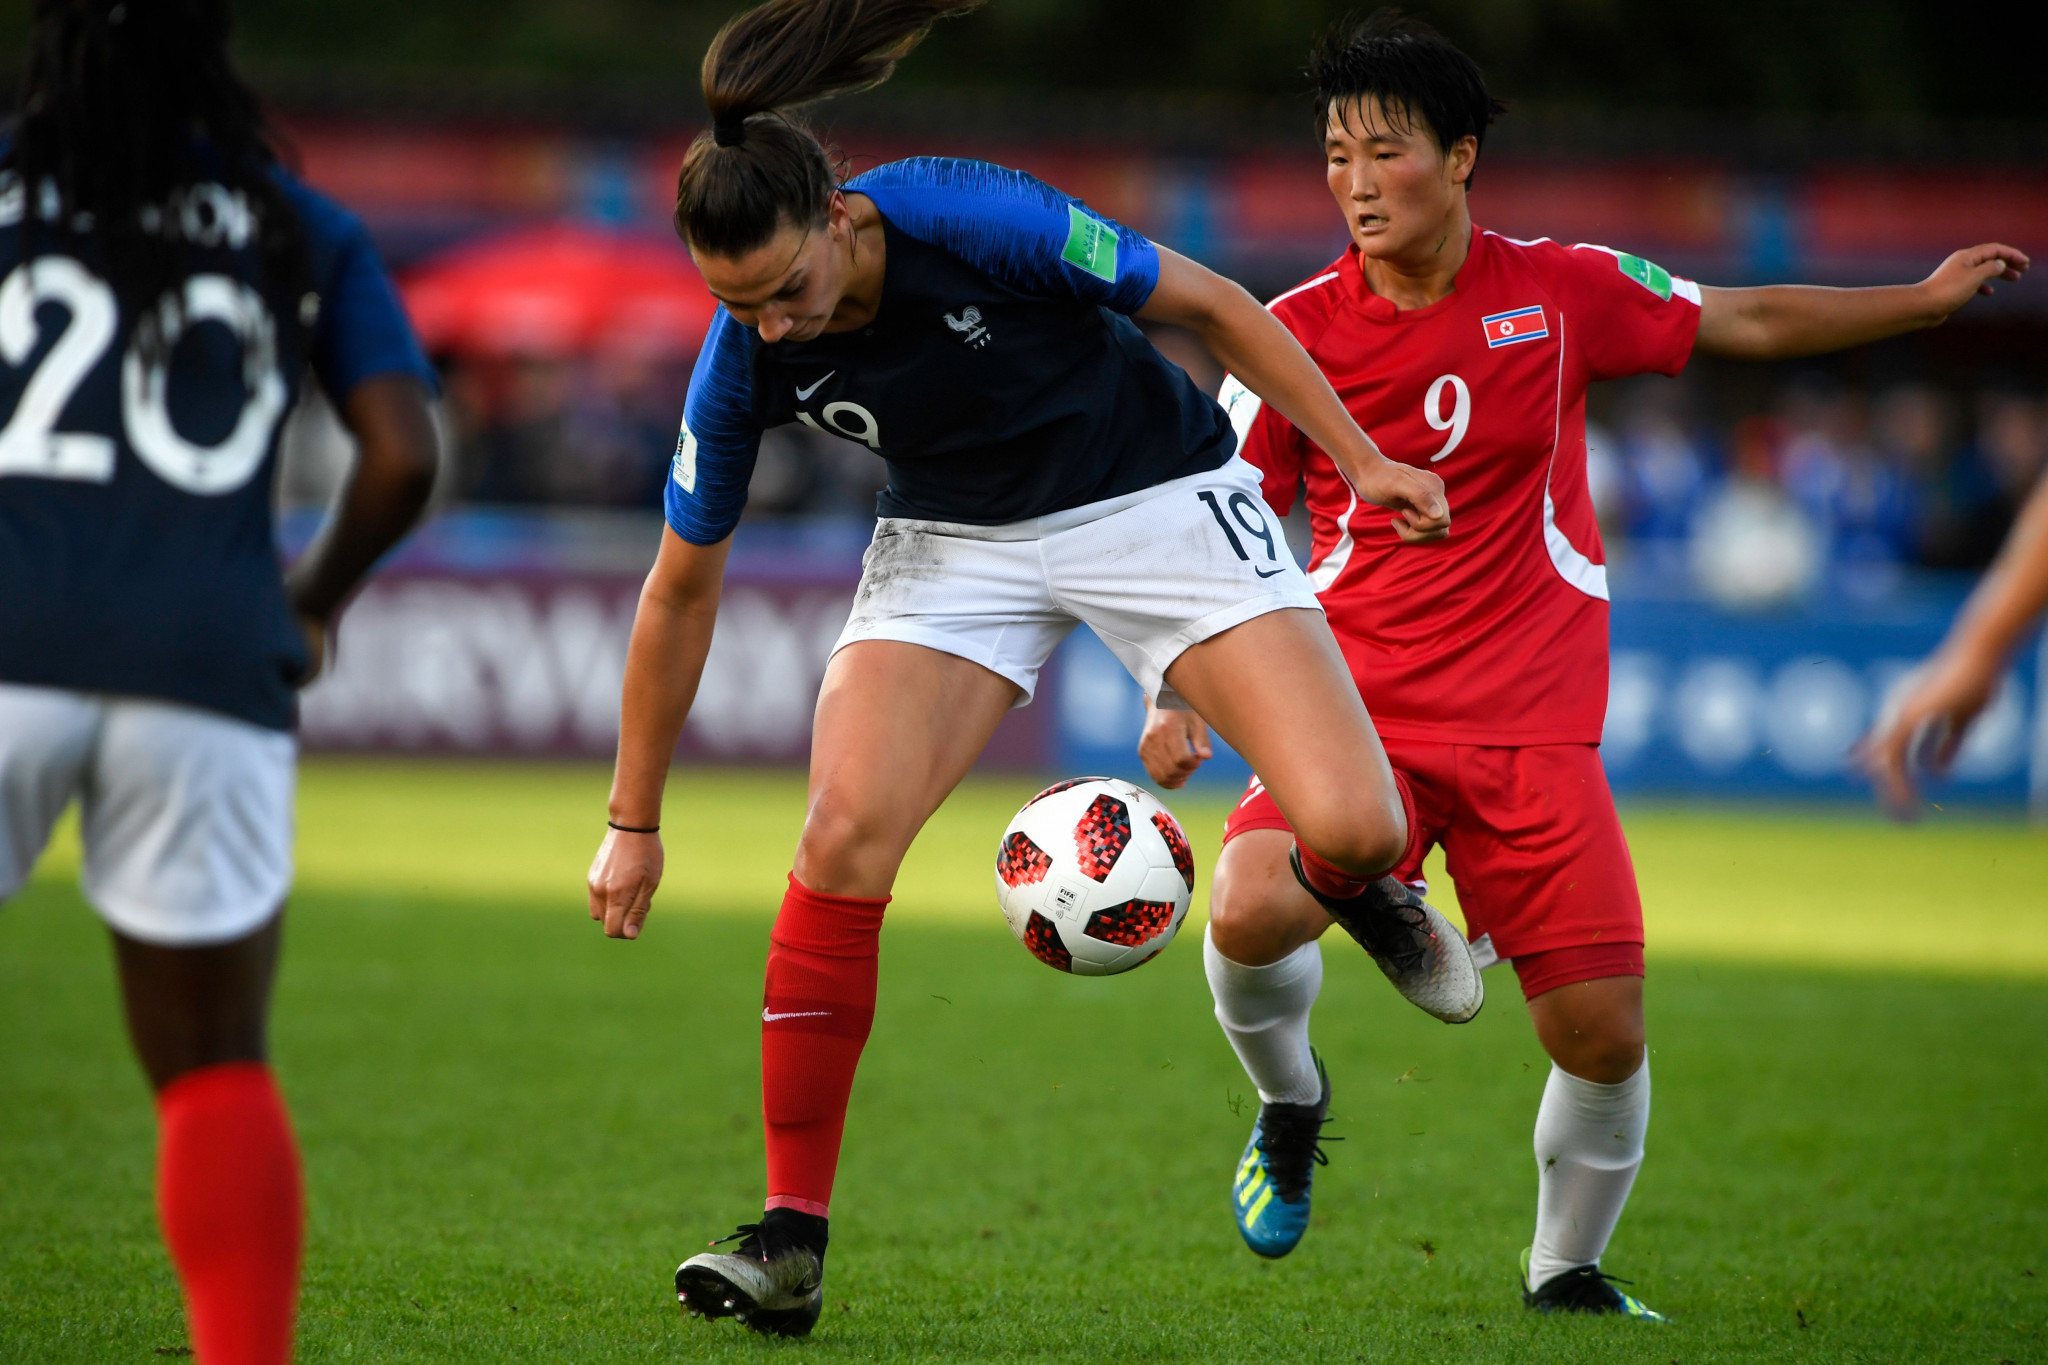 France reach FIFA Under-20 Women's World Cup semi-finals with victory over defending champions